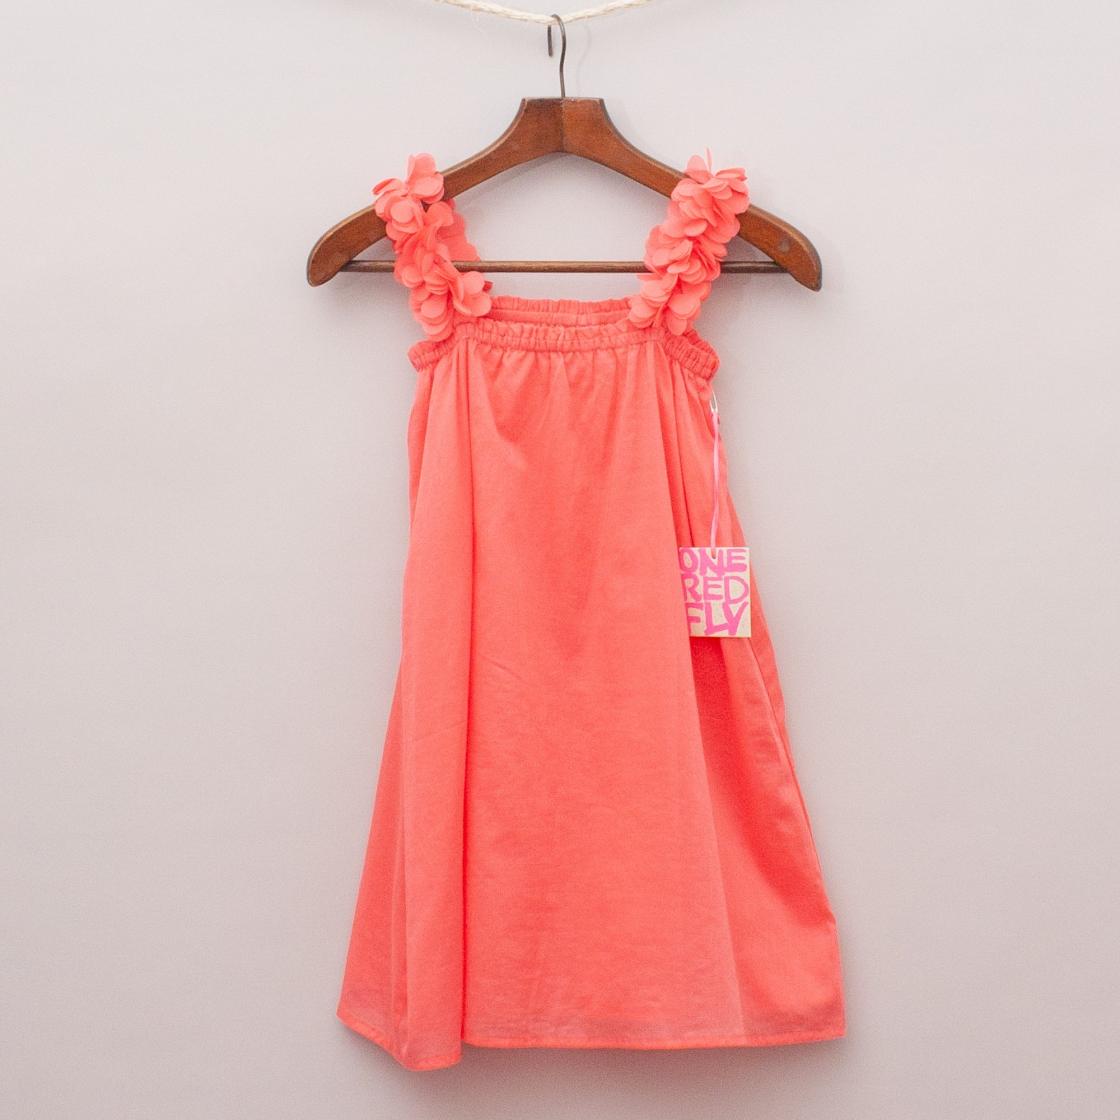 One Red Fly Watermelon Dress "Brand New"